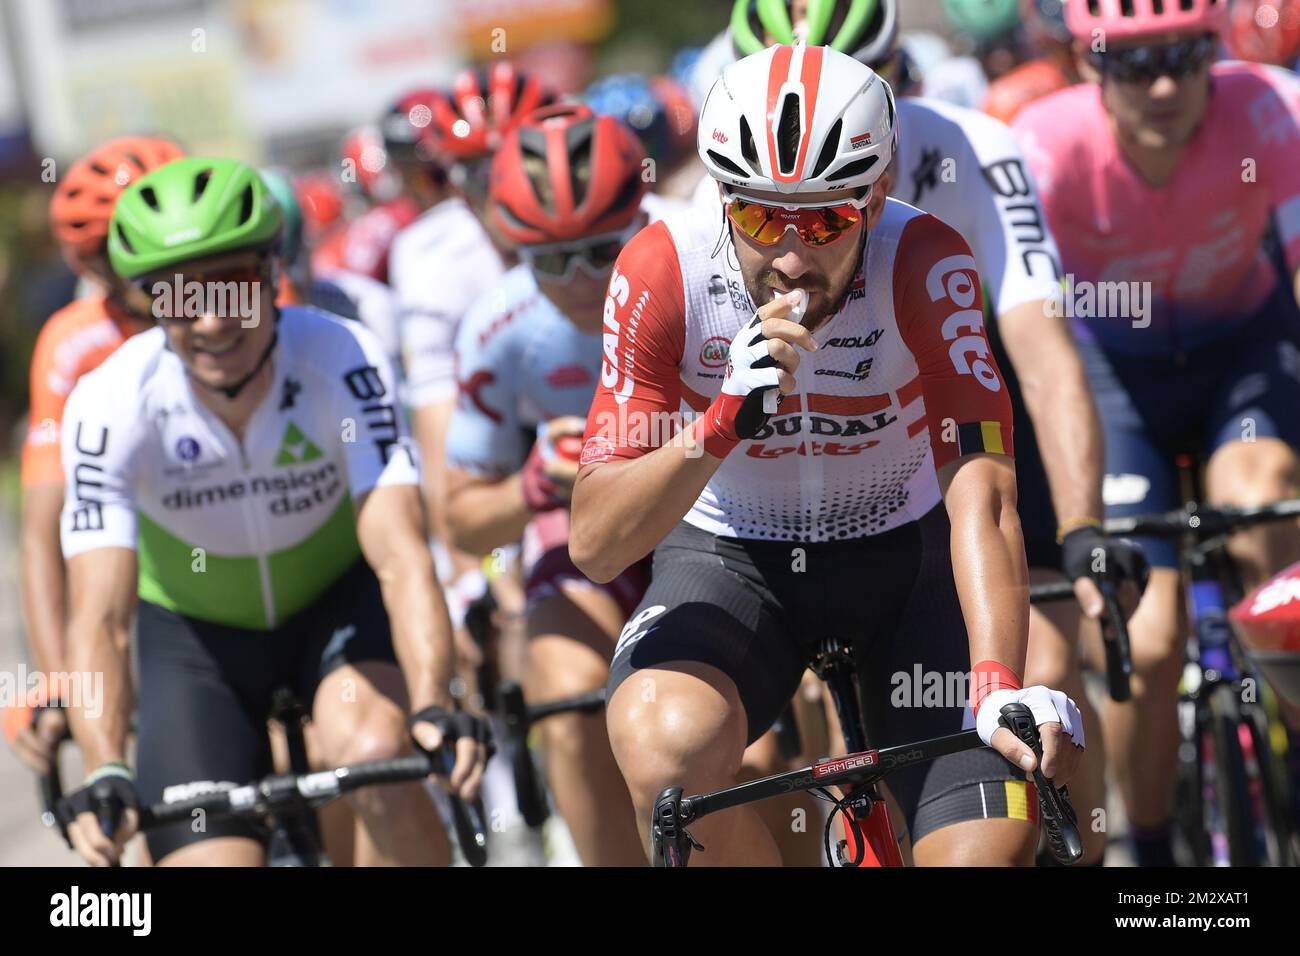 Belgian Thomas De Gendt of Lotto Soudal eats something during the fifth stage of the 106th edition of the Tour de France cycling race, 175,5 km from Saint-Die-des-Vosges to Colmar, Wednesday 10 July 2019. This year's Tour de France starts in Brussels and takes place from July 6th to July 28th. BELGA PHOTO YORICK JANSENS  Stock Photo